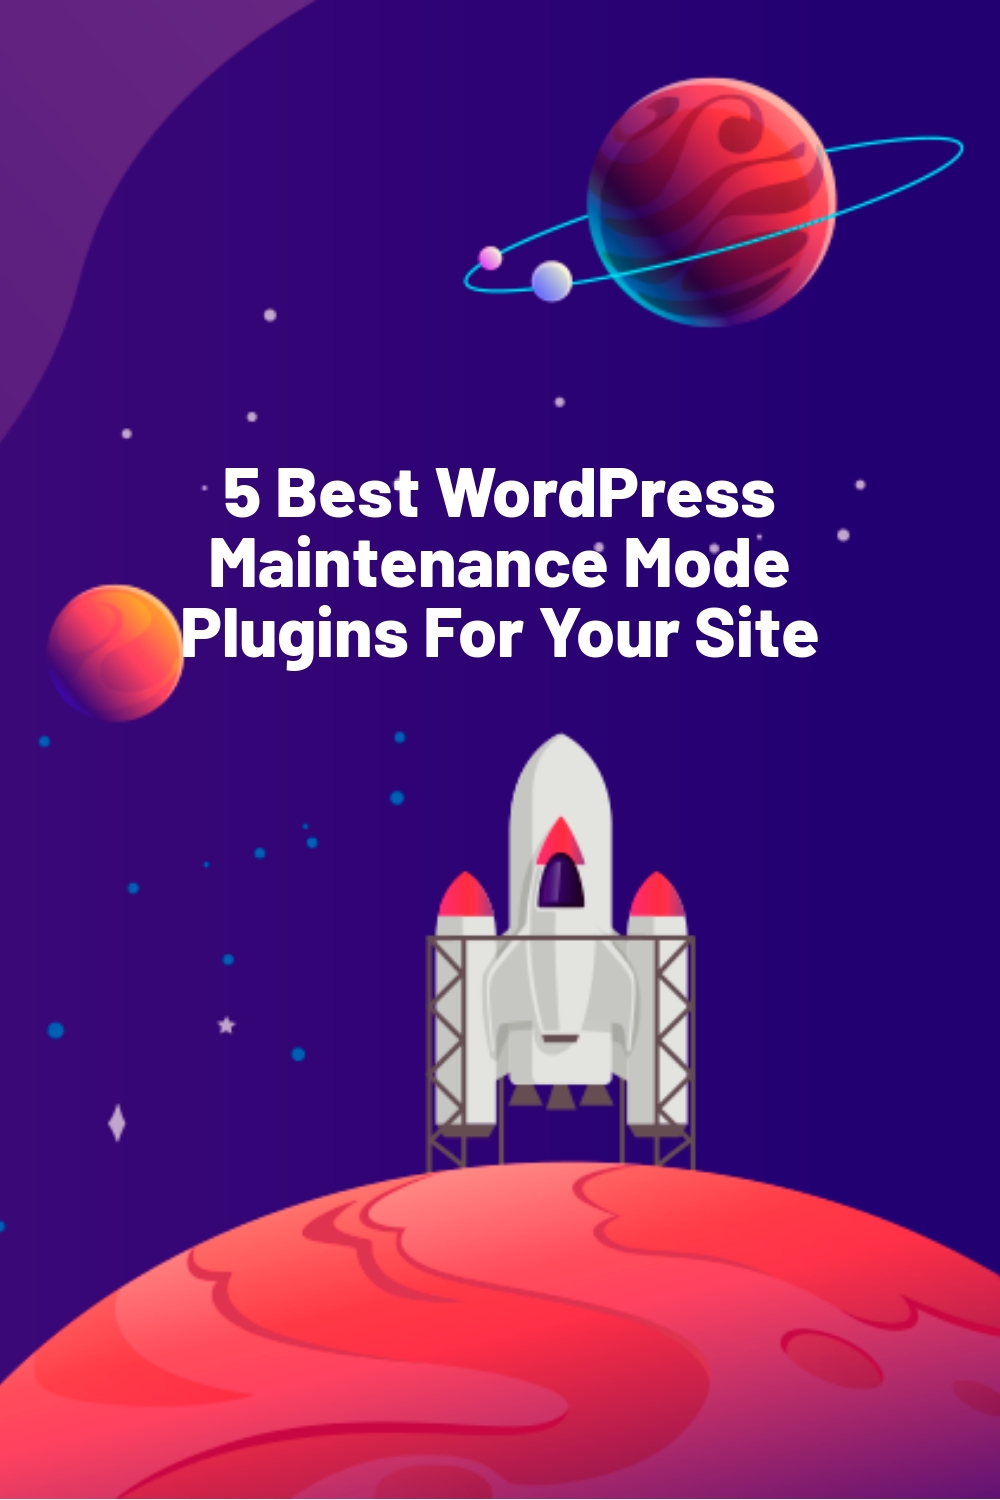 5 Best WordPress Maintenance Mode Plugins For Your Site